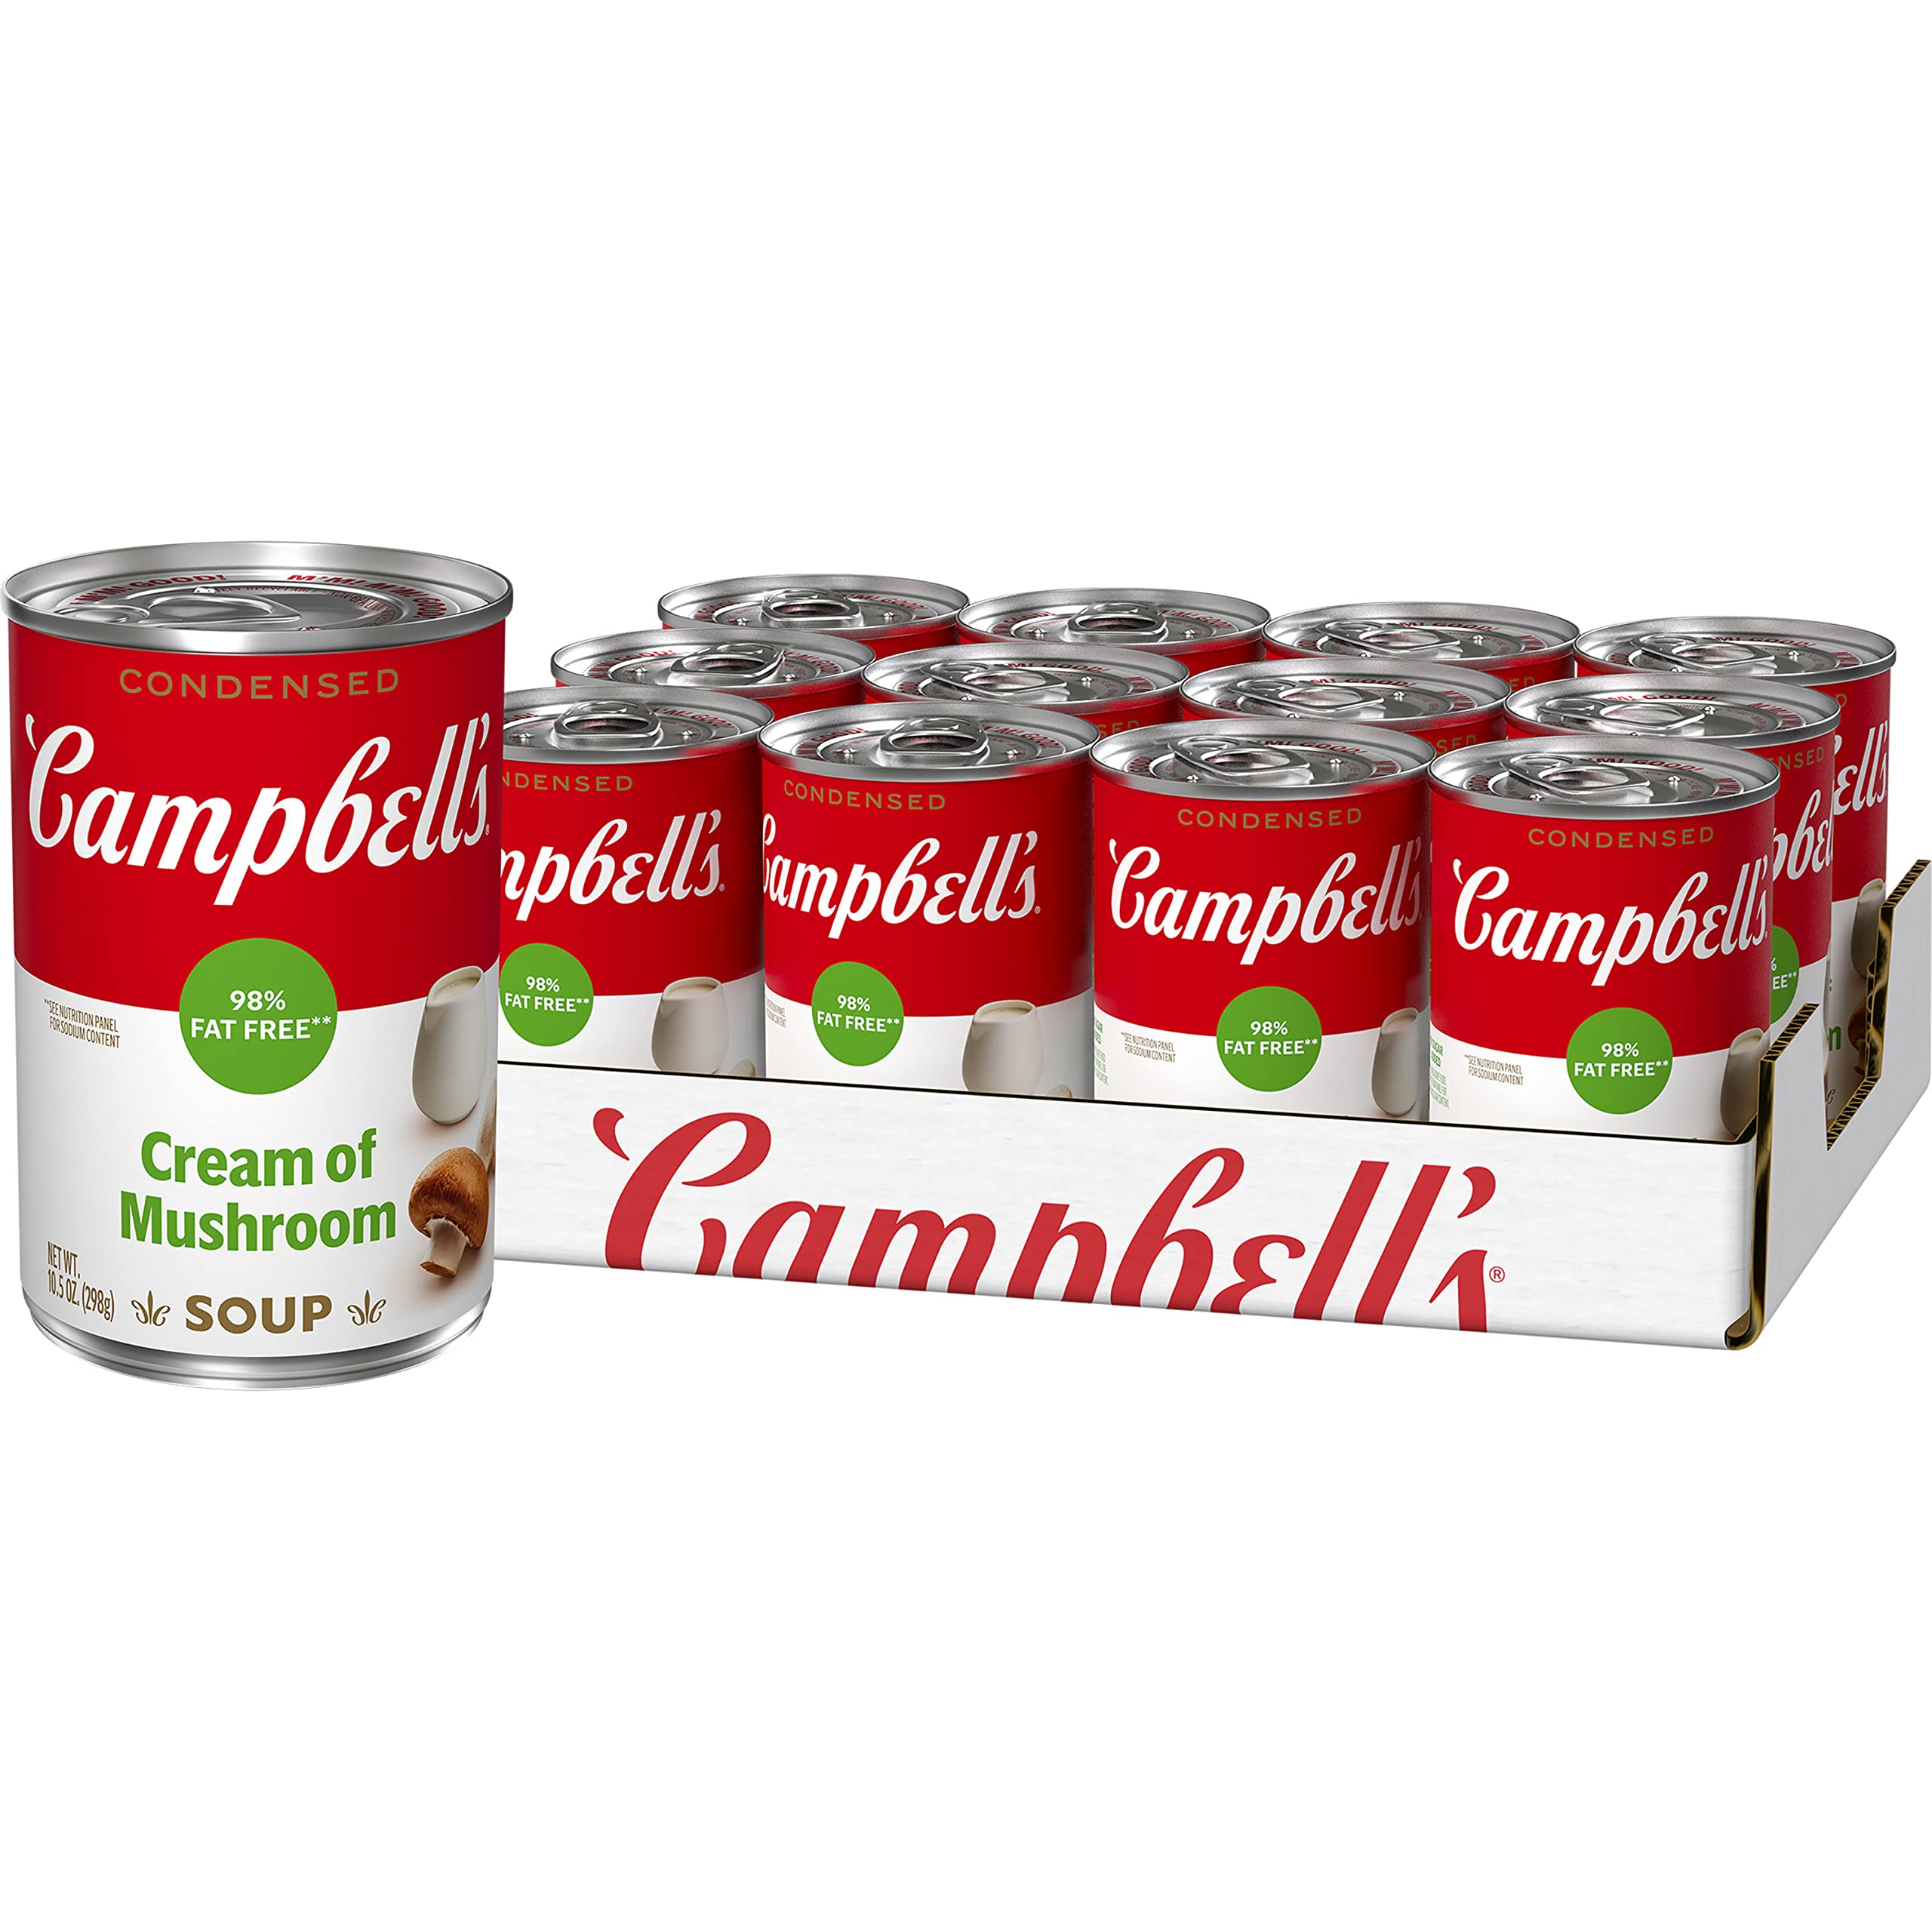 12-pack of 10.5oz Campbell’s Condensed 98% Fat Free Cream of Mushroom Soup $7.43 at Amazon